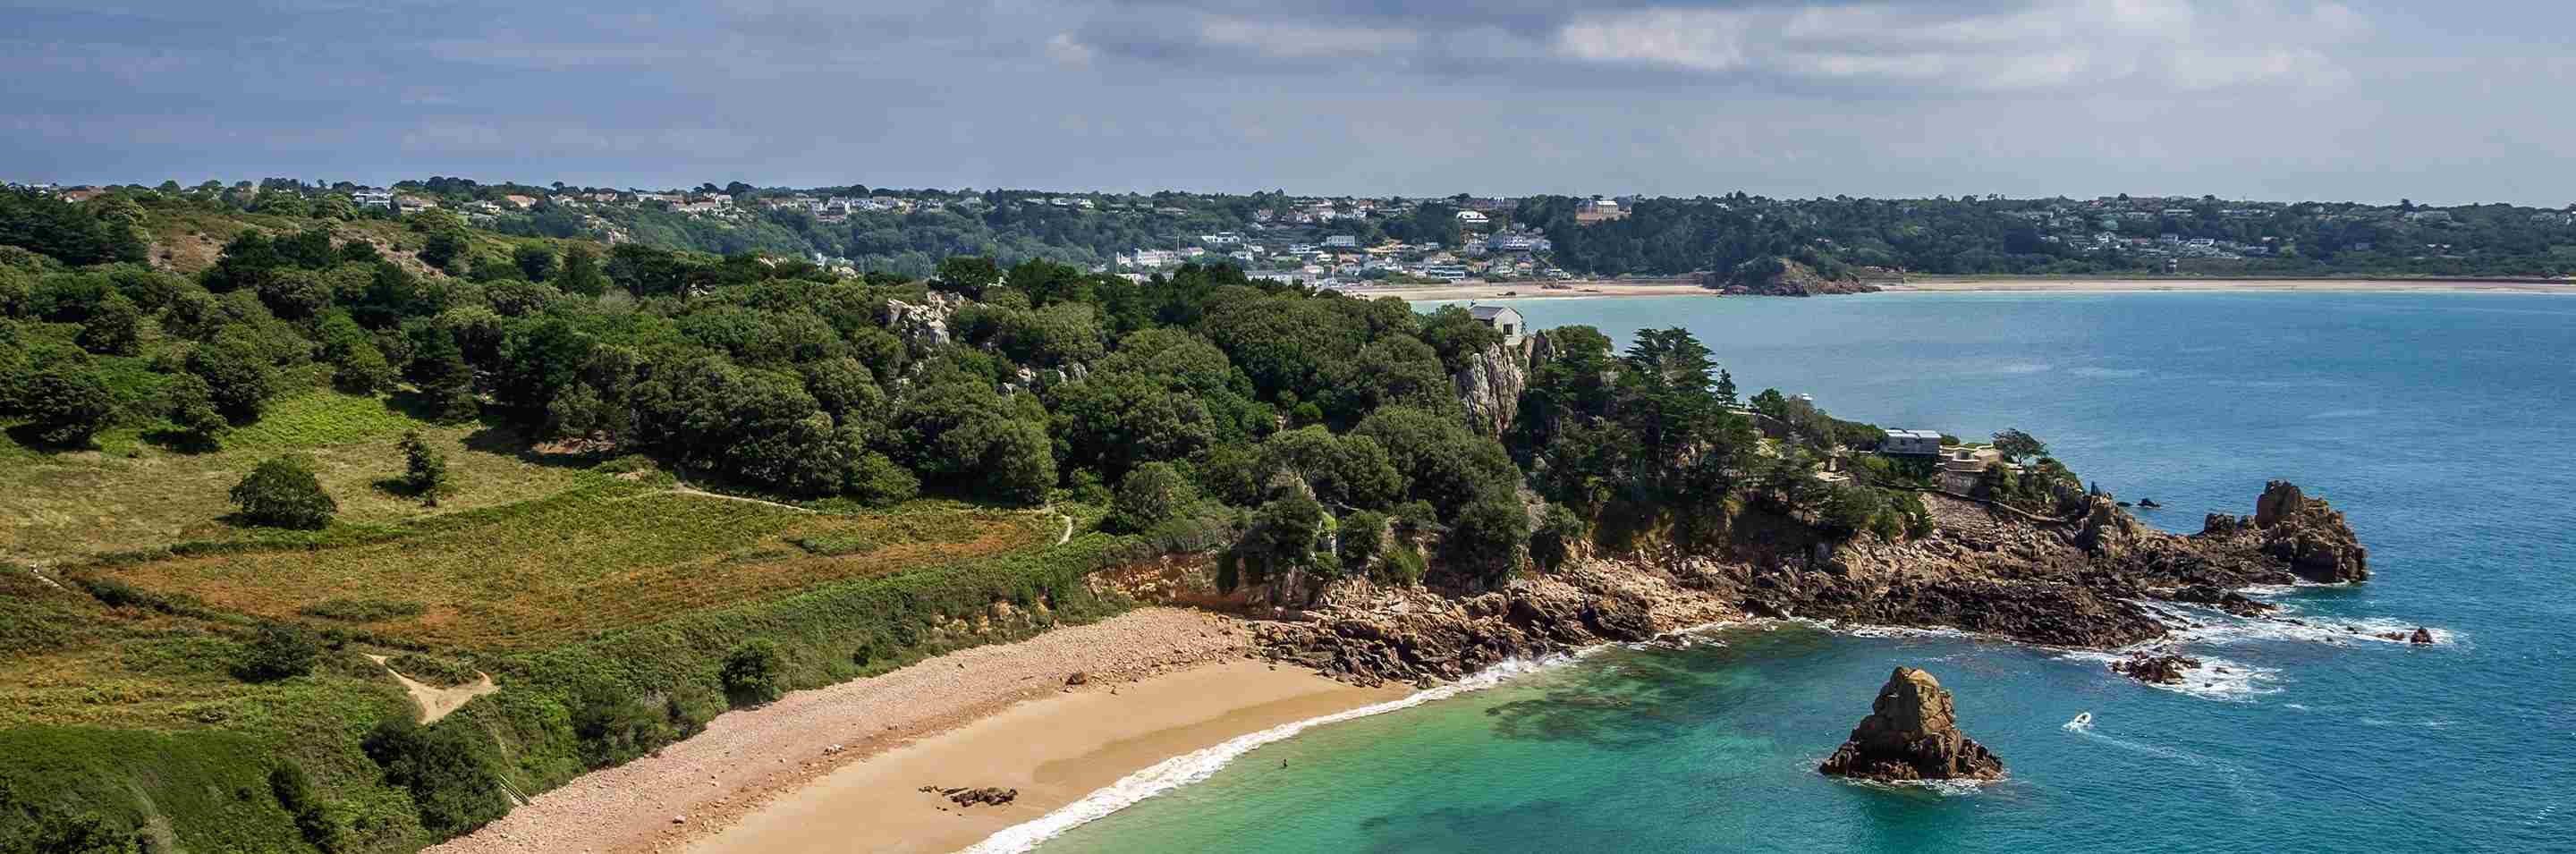 cheap flights to Jersey with Aer Lingus